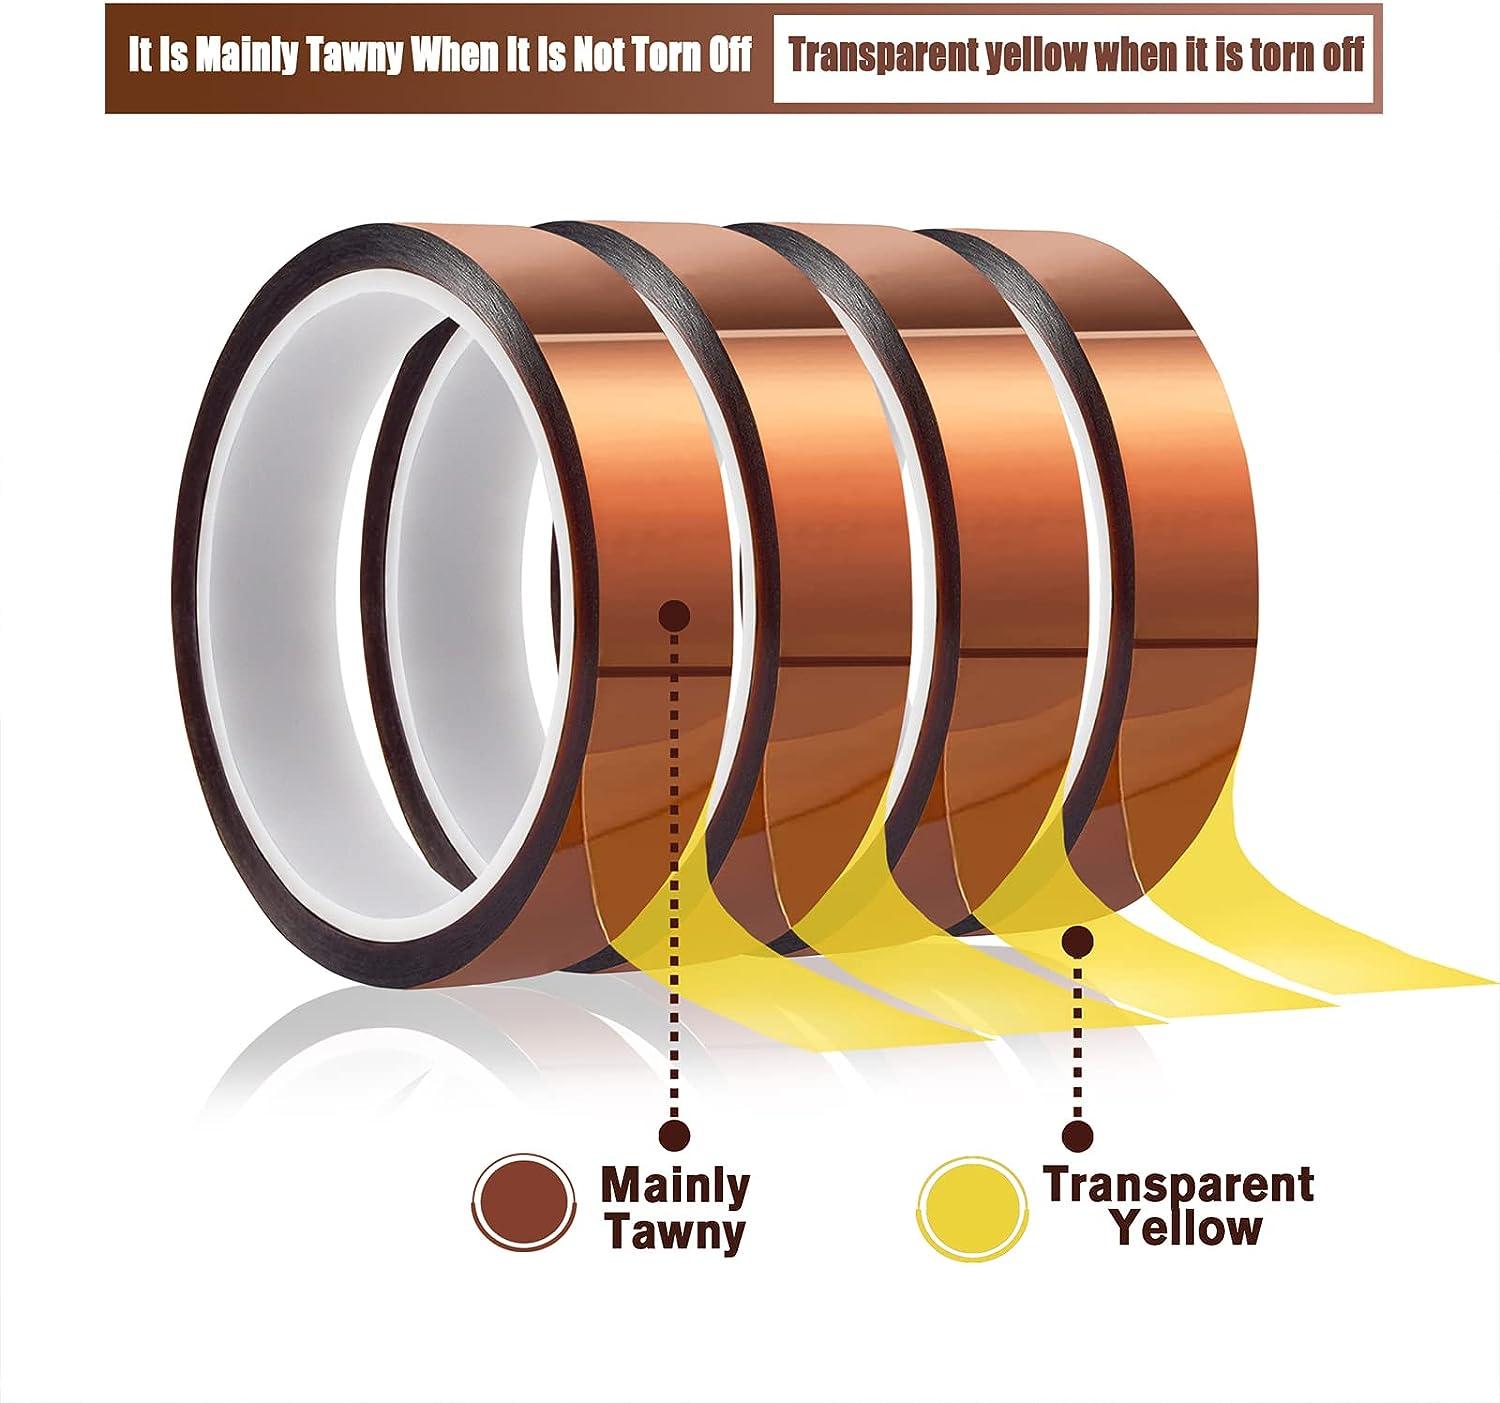 4 20mm X33M(108Ft) Clear Heat Tape for Htv Electrical Tape Transparent High  Temperature Sublimation Heat Resistant 